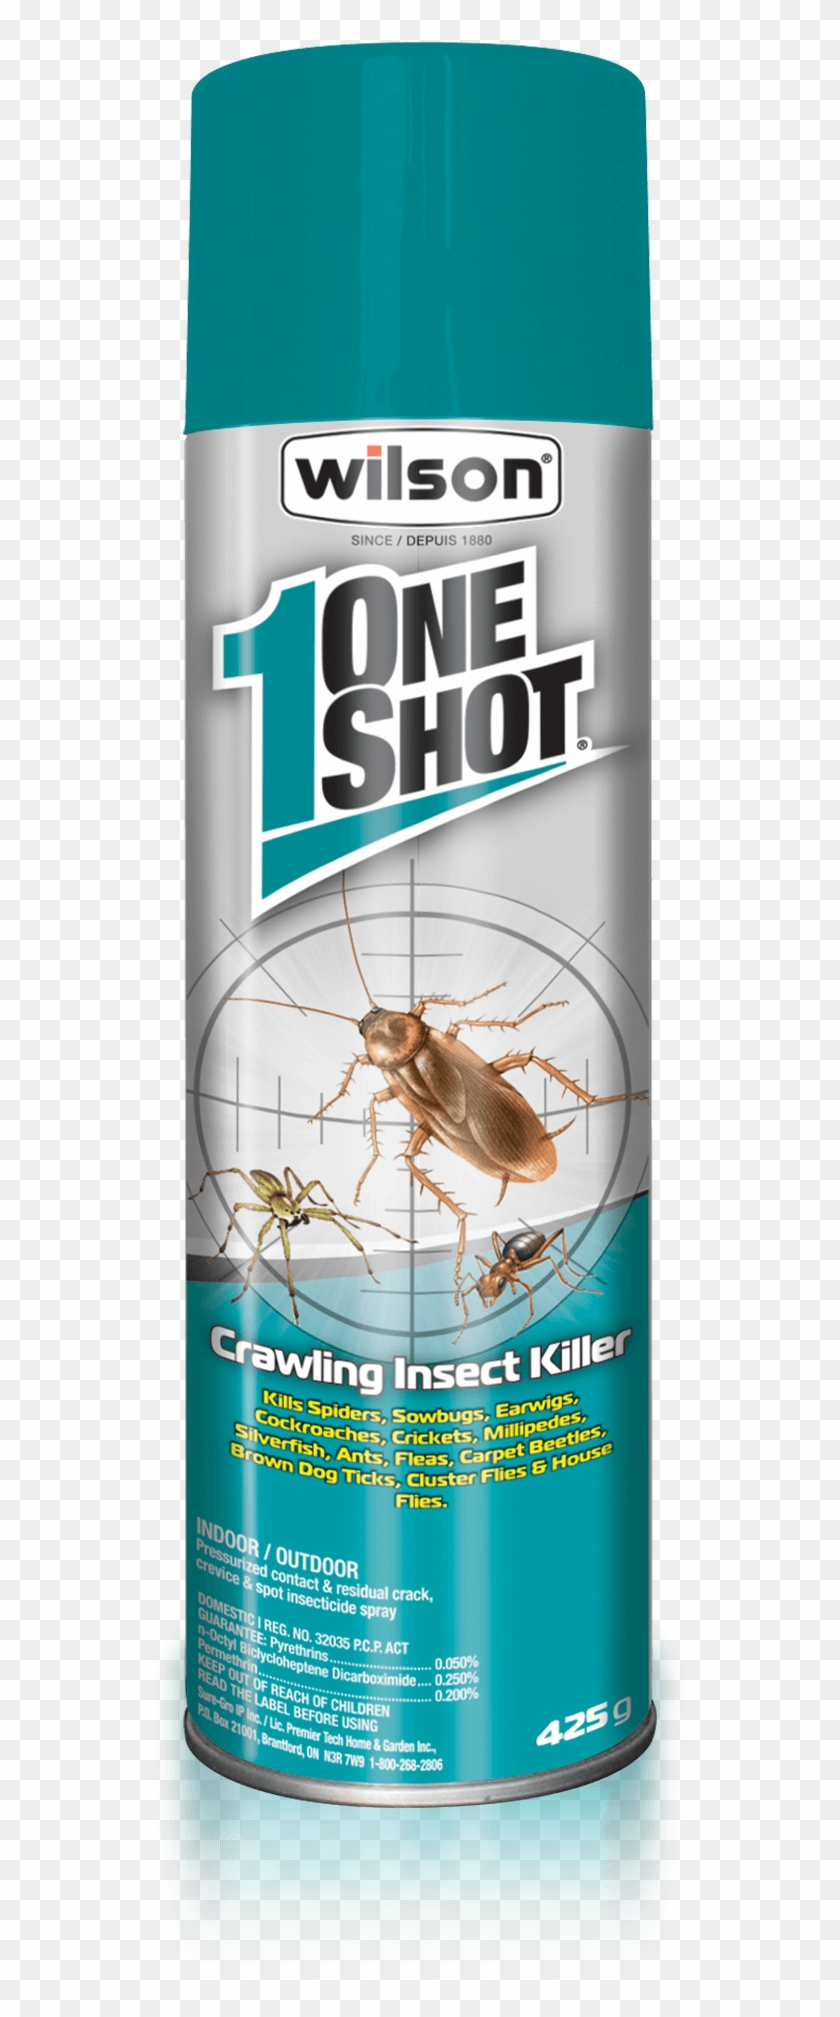 Wilson One Shot Crawling Insect Killer - Arachnicide Clipart #4564757